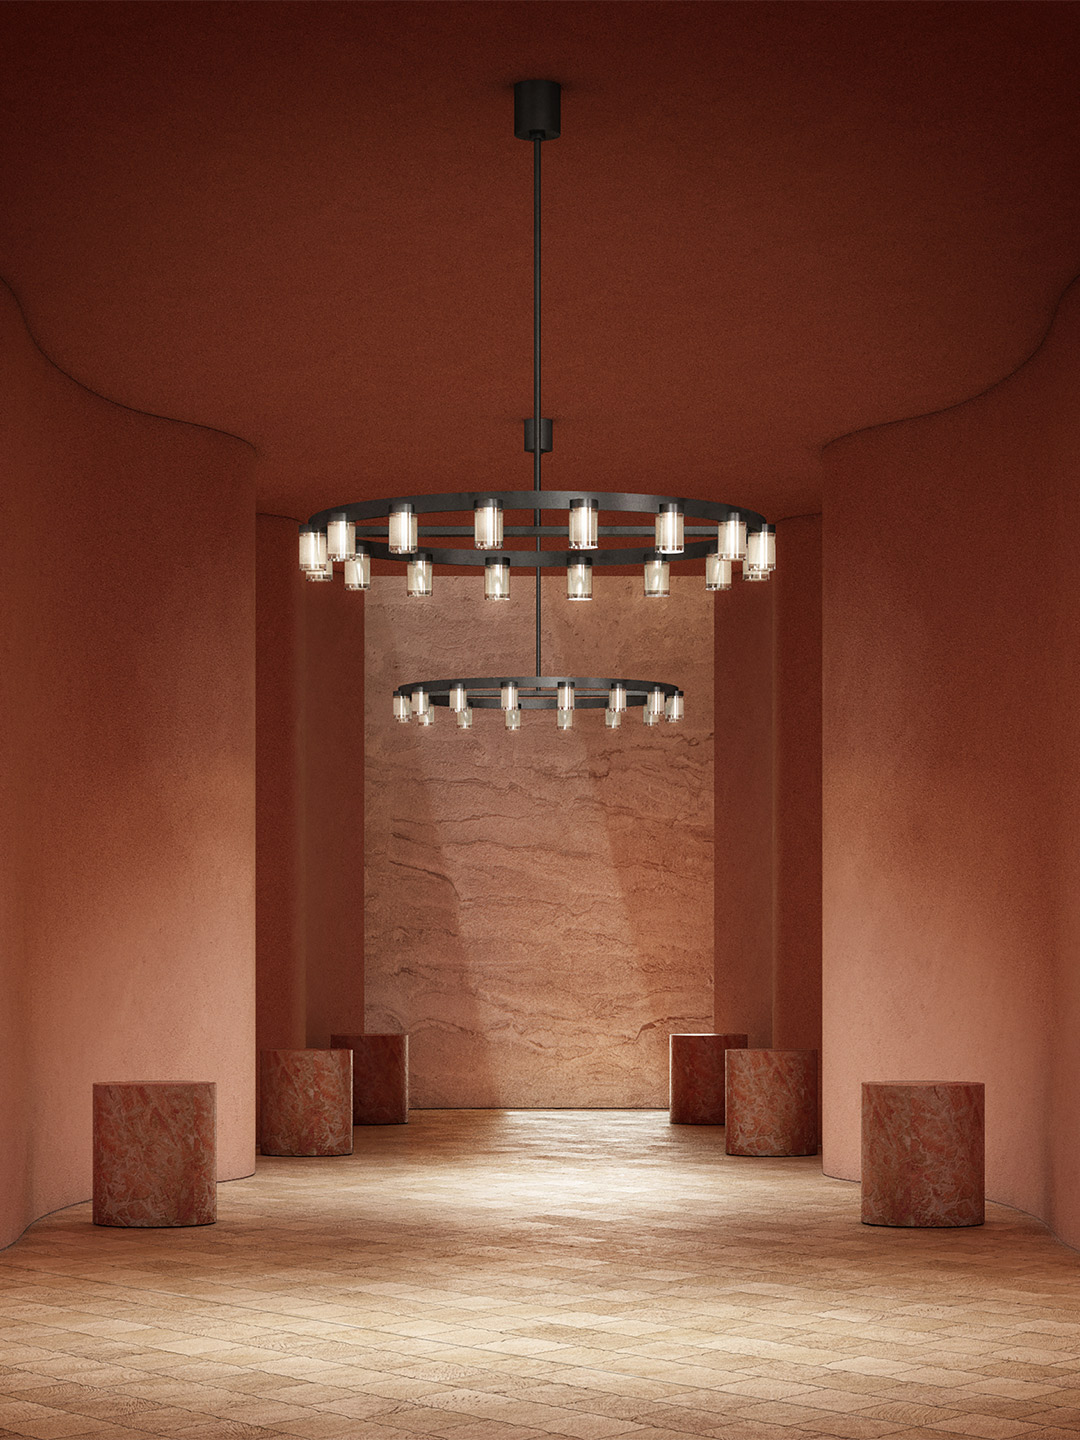 Kelly Wearstler unveils new lighting collection with Tech Lighting